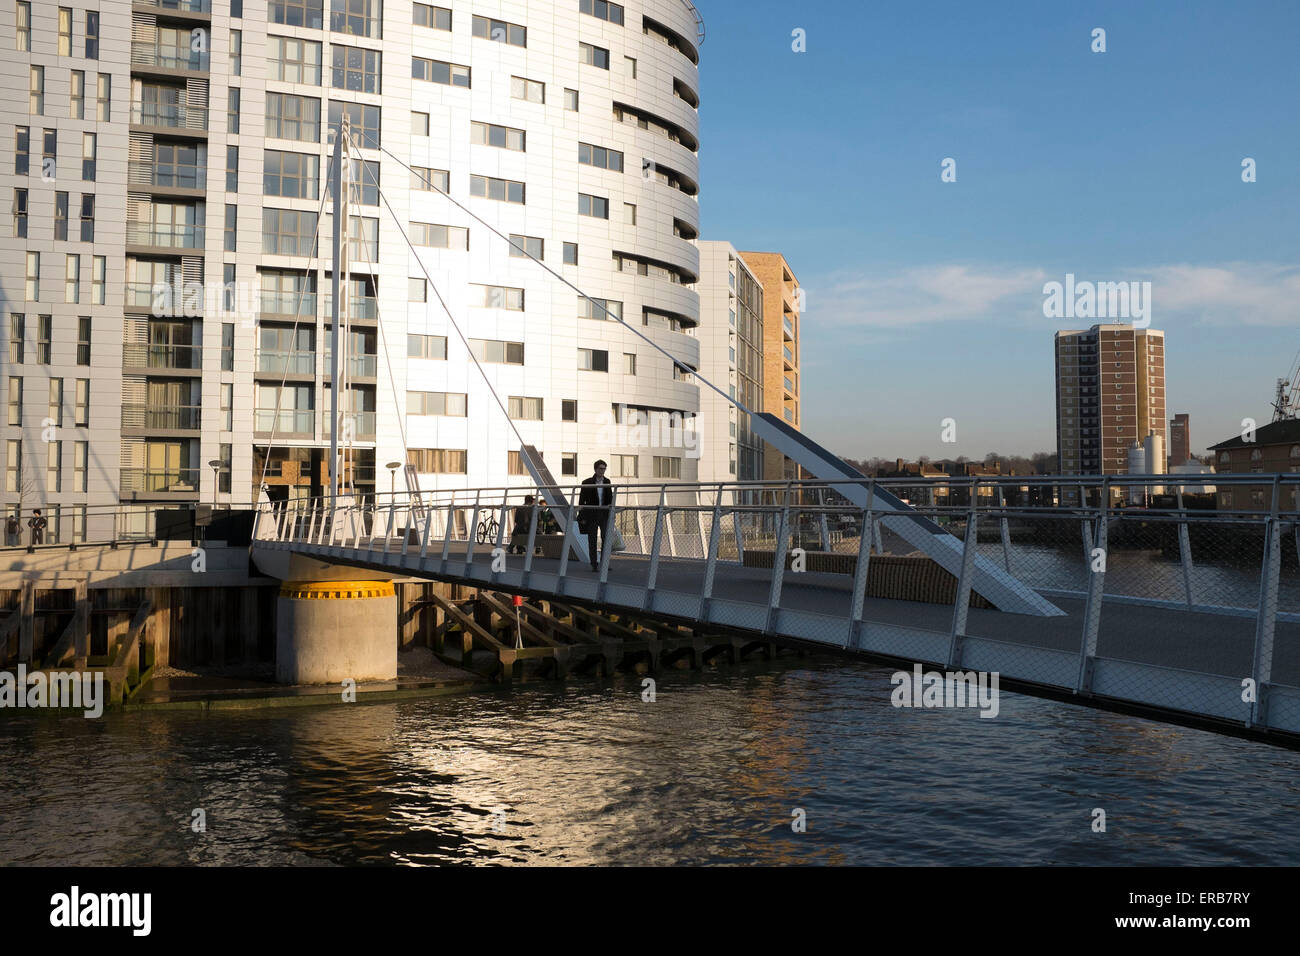 New walkway bridge across the River Thames at Greenwich, allowing pedestrians to cross to a new development. London, UK. Stock Photo